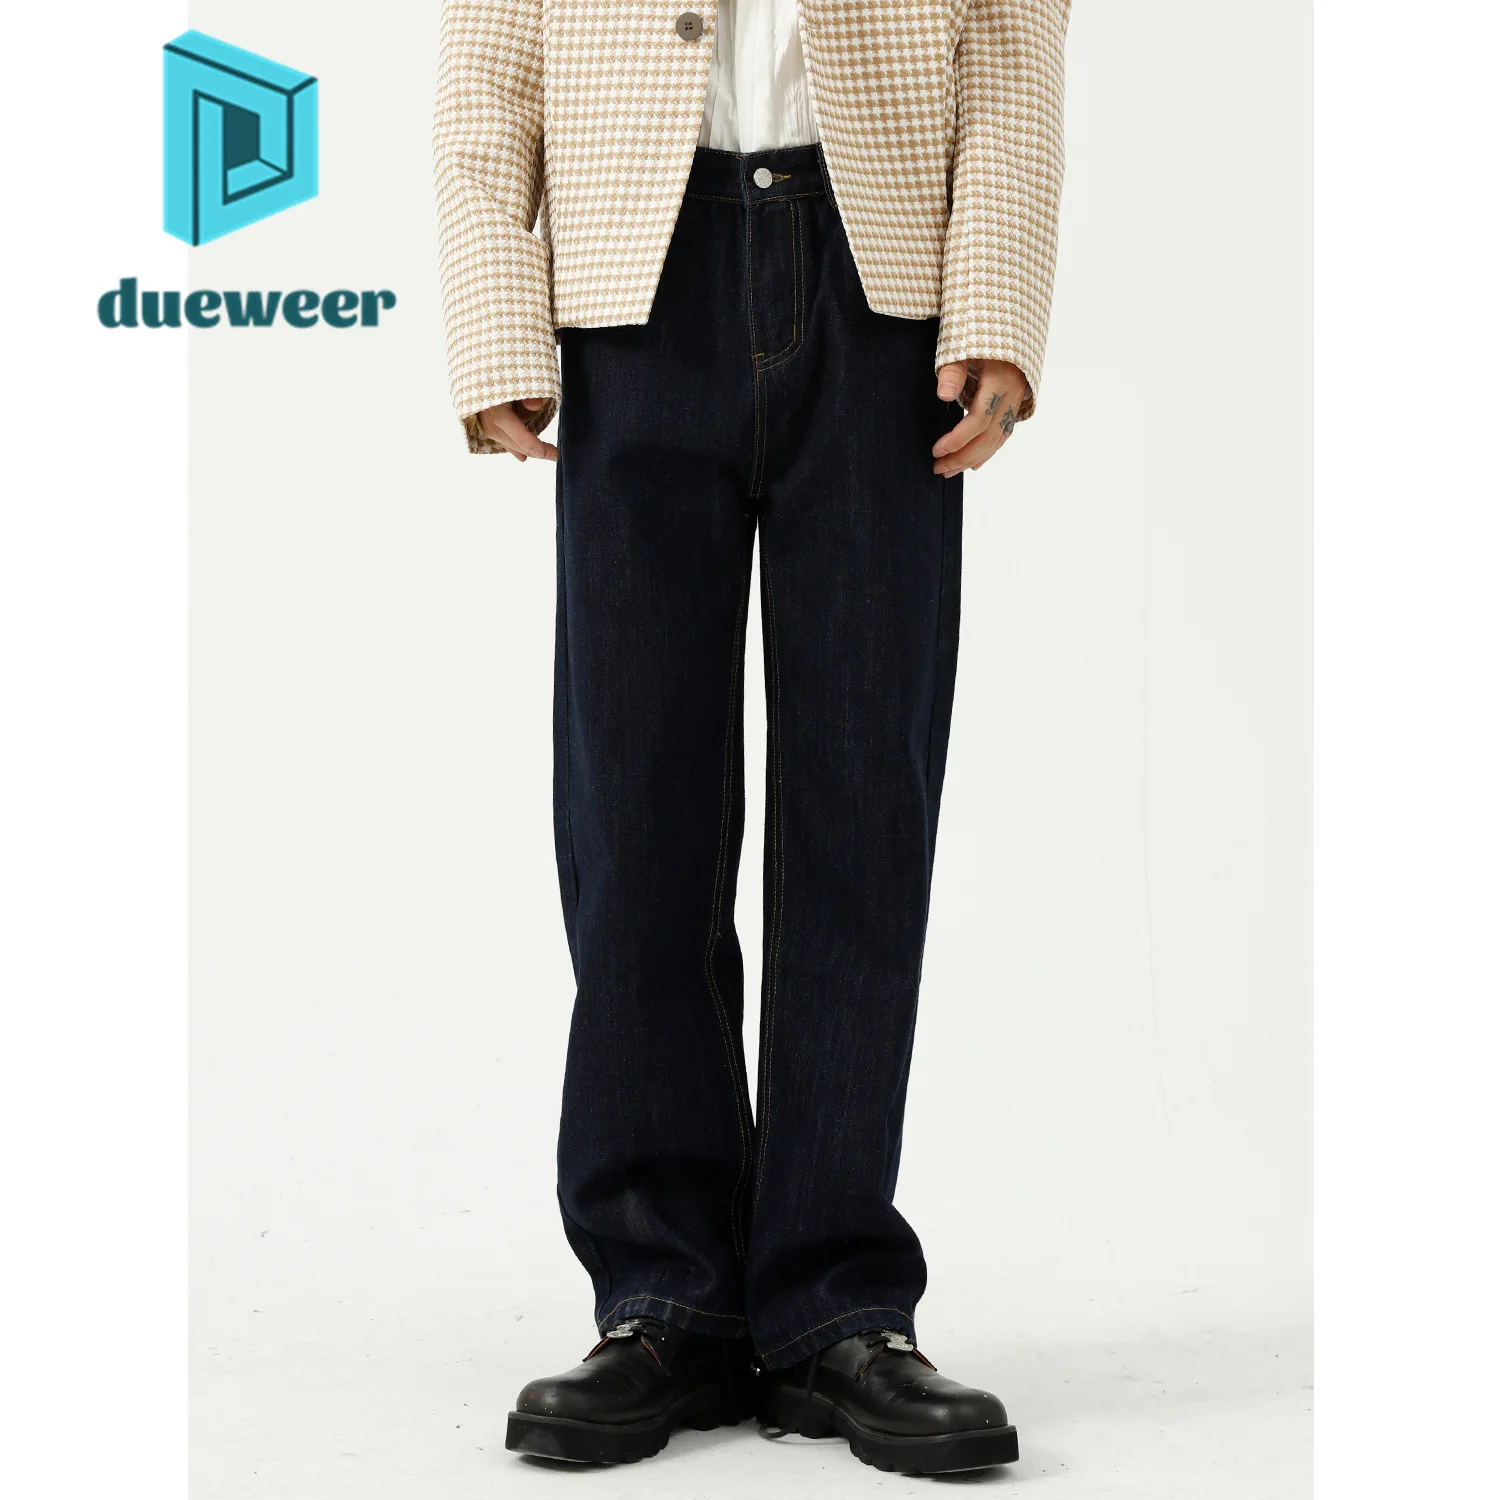 

DUEWEER Men's Straight Baggy Jeans Punk Goth Denim Pants for Men Fashion Casual Trousers Distressed Hip Hop Vintage Streetwear